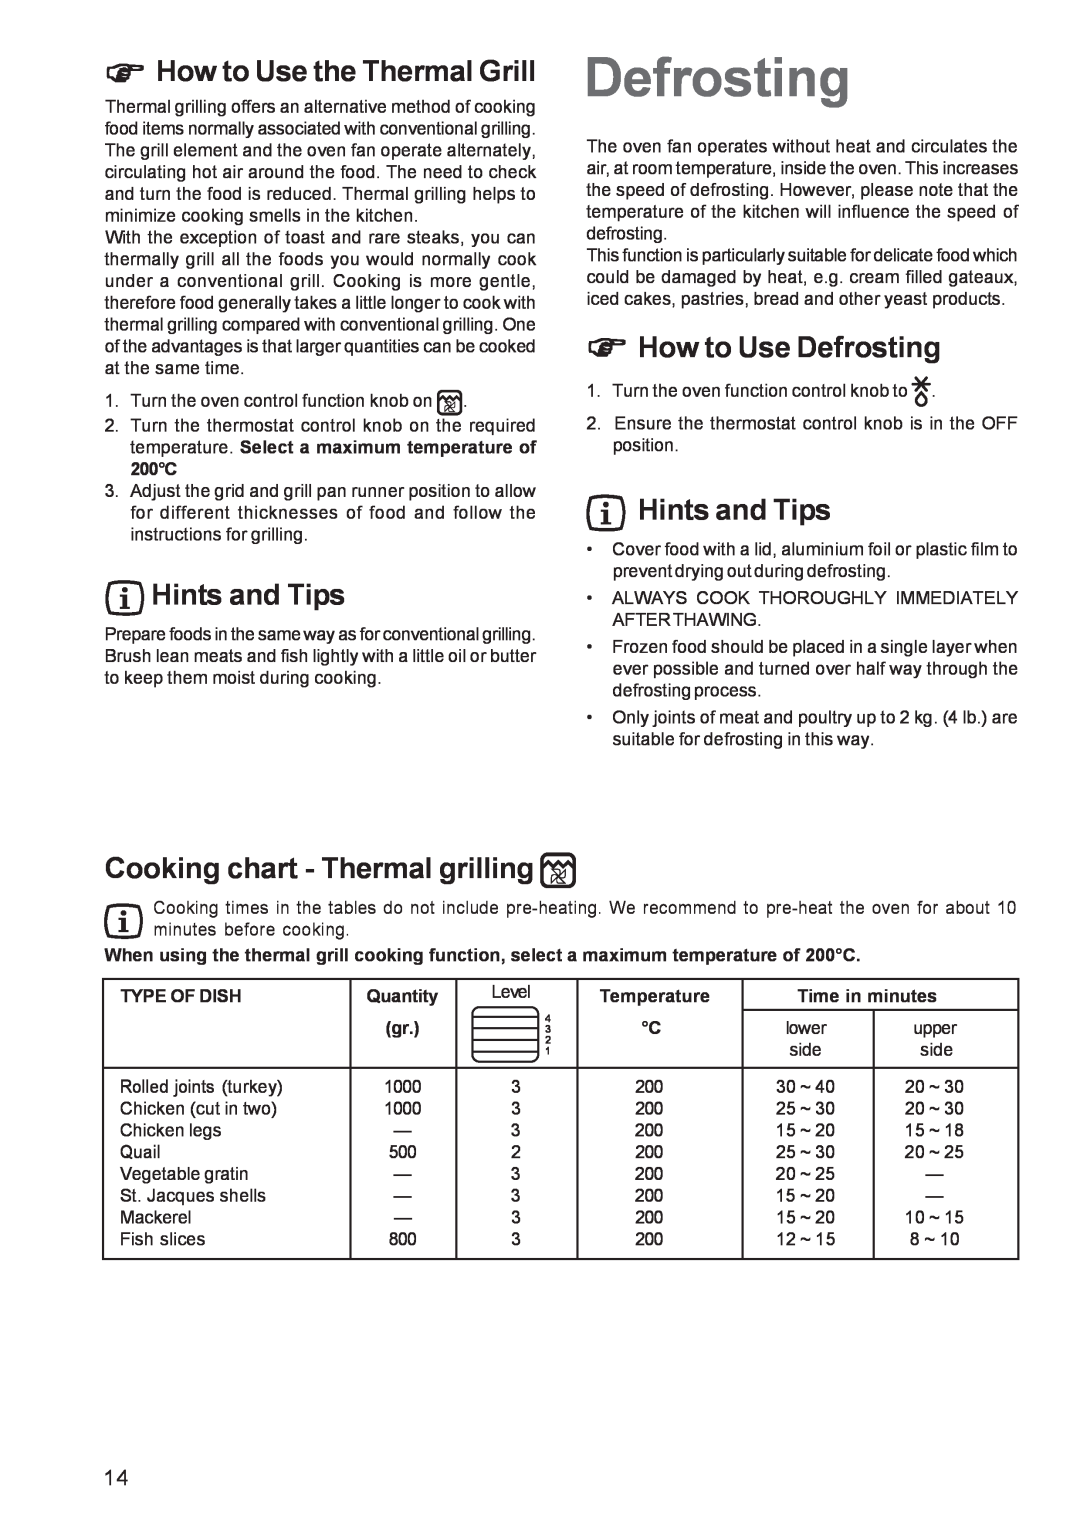 Zanussi ZBS863 How to Use the Thermal Grill, How to Use Defrosting, Cooking chart - Thermal grilling, Hints and Tips 